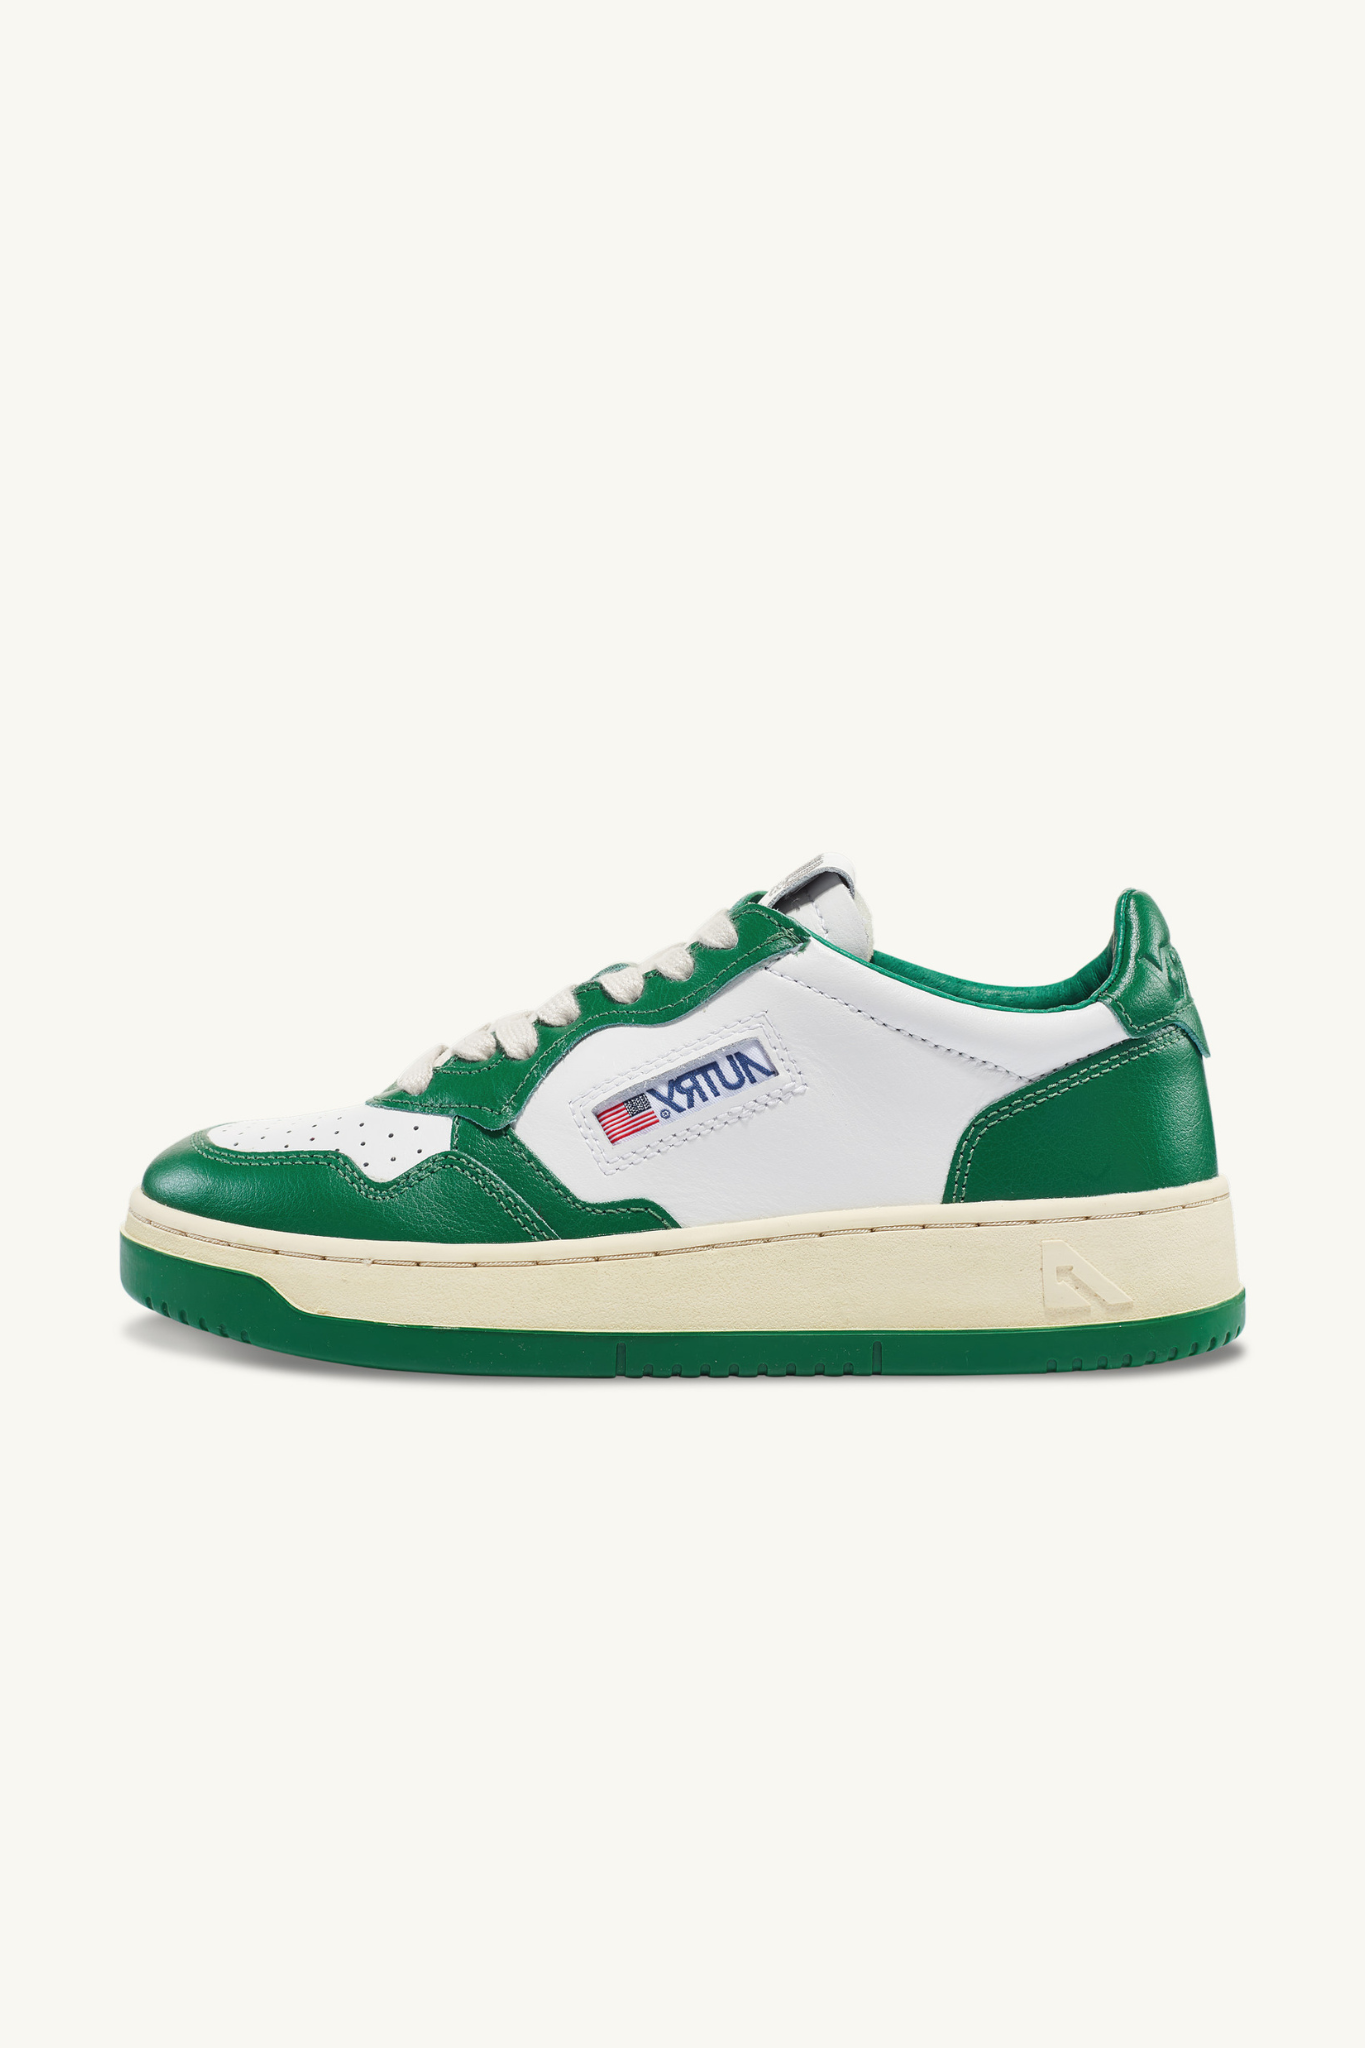 AULW-WB03 - MEDALIST LOW SNEAKERS IN TWO-TONE LEATHER COLOR WHITE AND GREEN